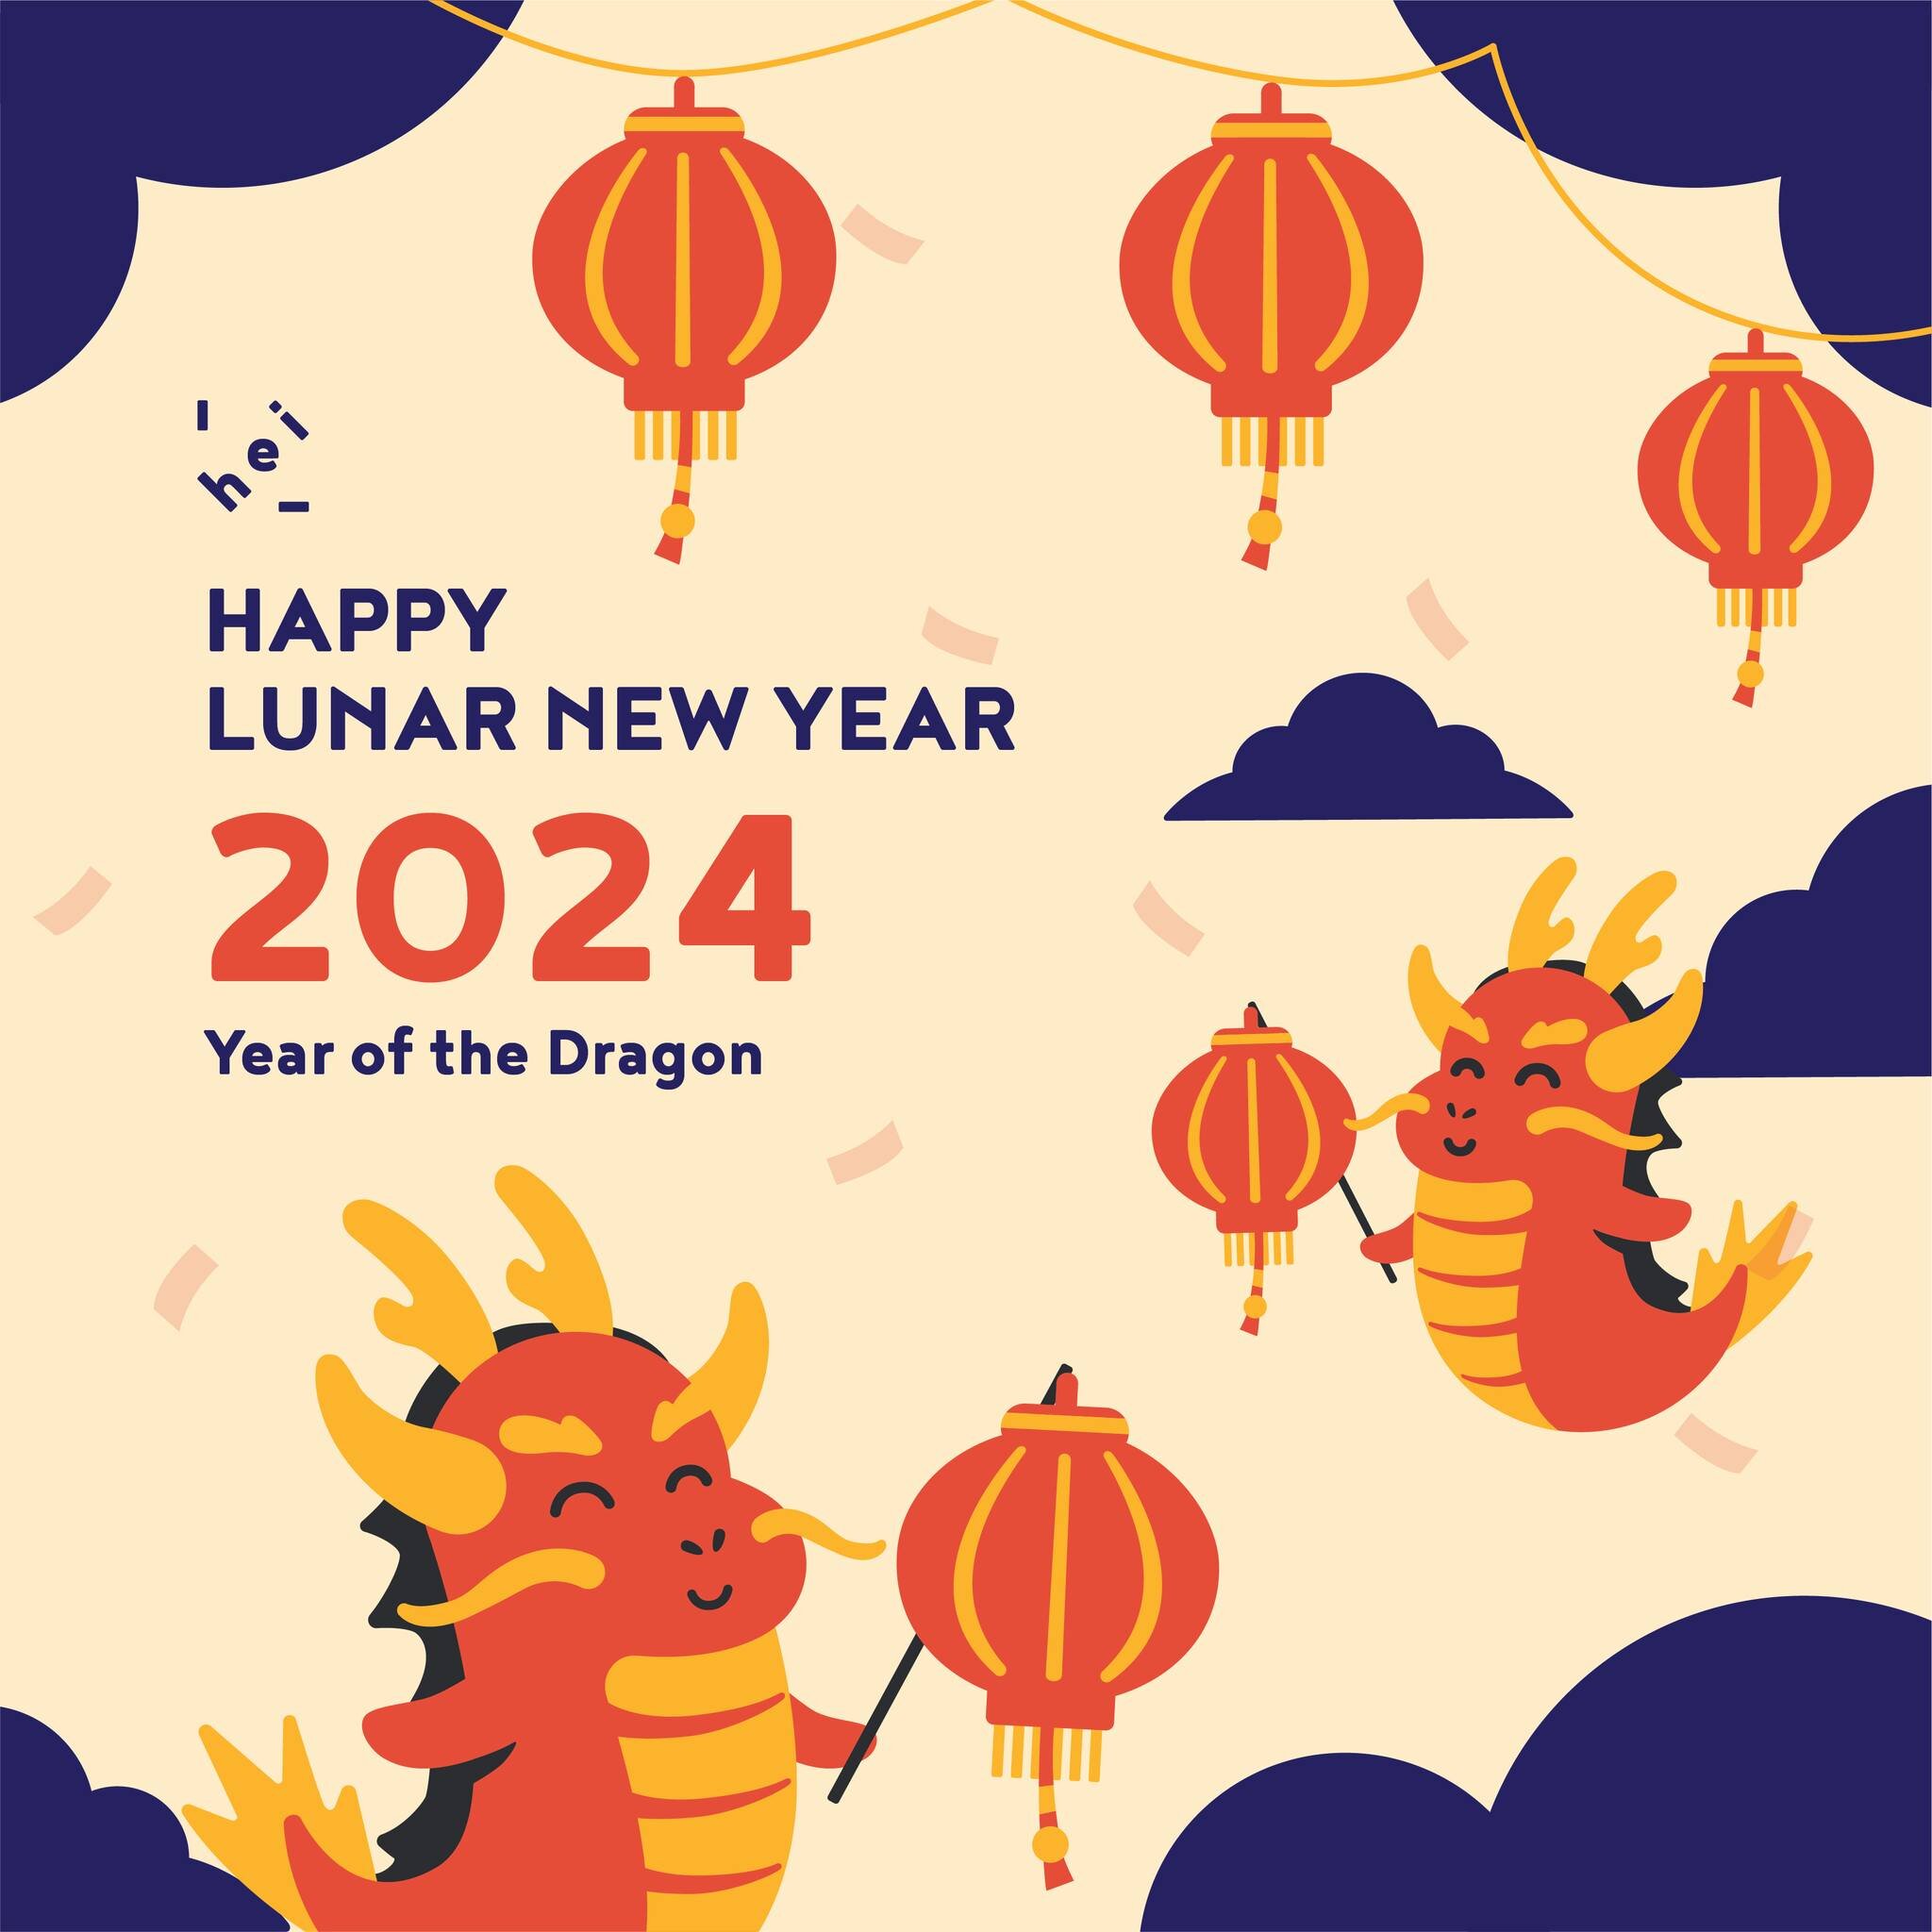 Gōng xǐ fā c&aacute;i!
Happy Lunar New Year from all of us at HEI Schools Brunswick East Early Education Centre.